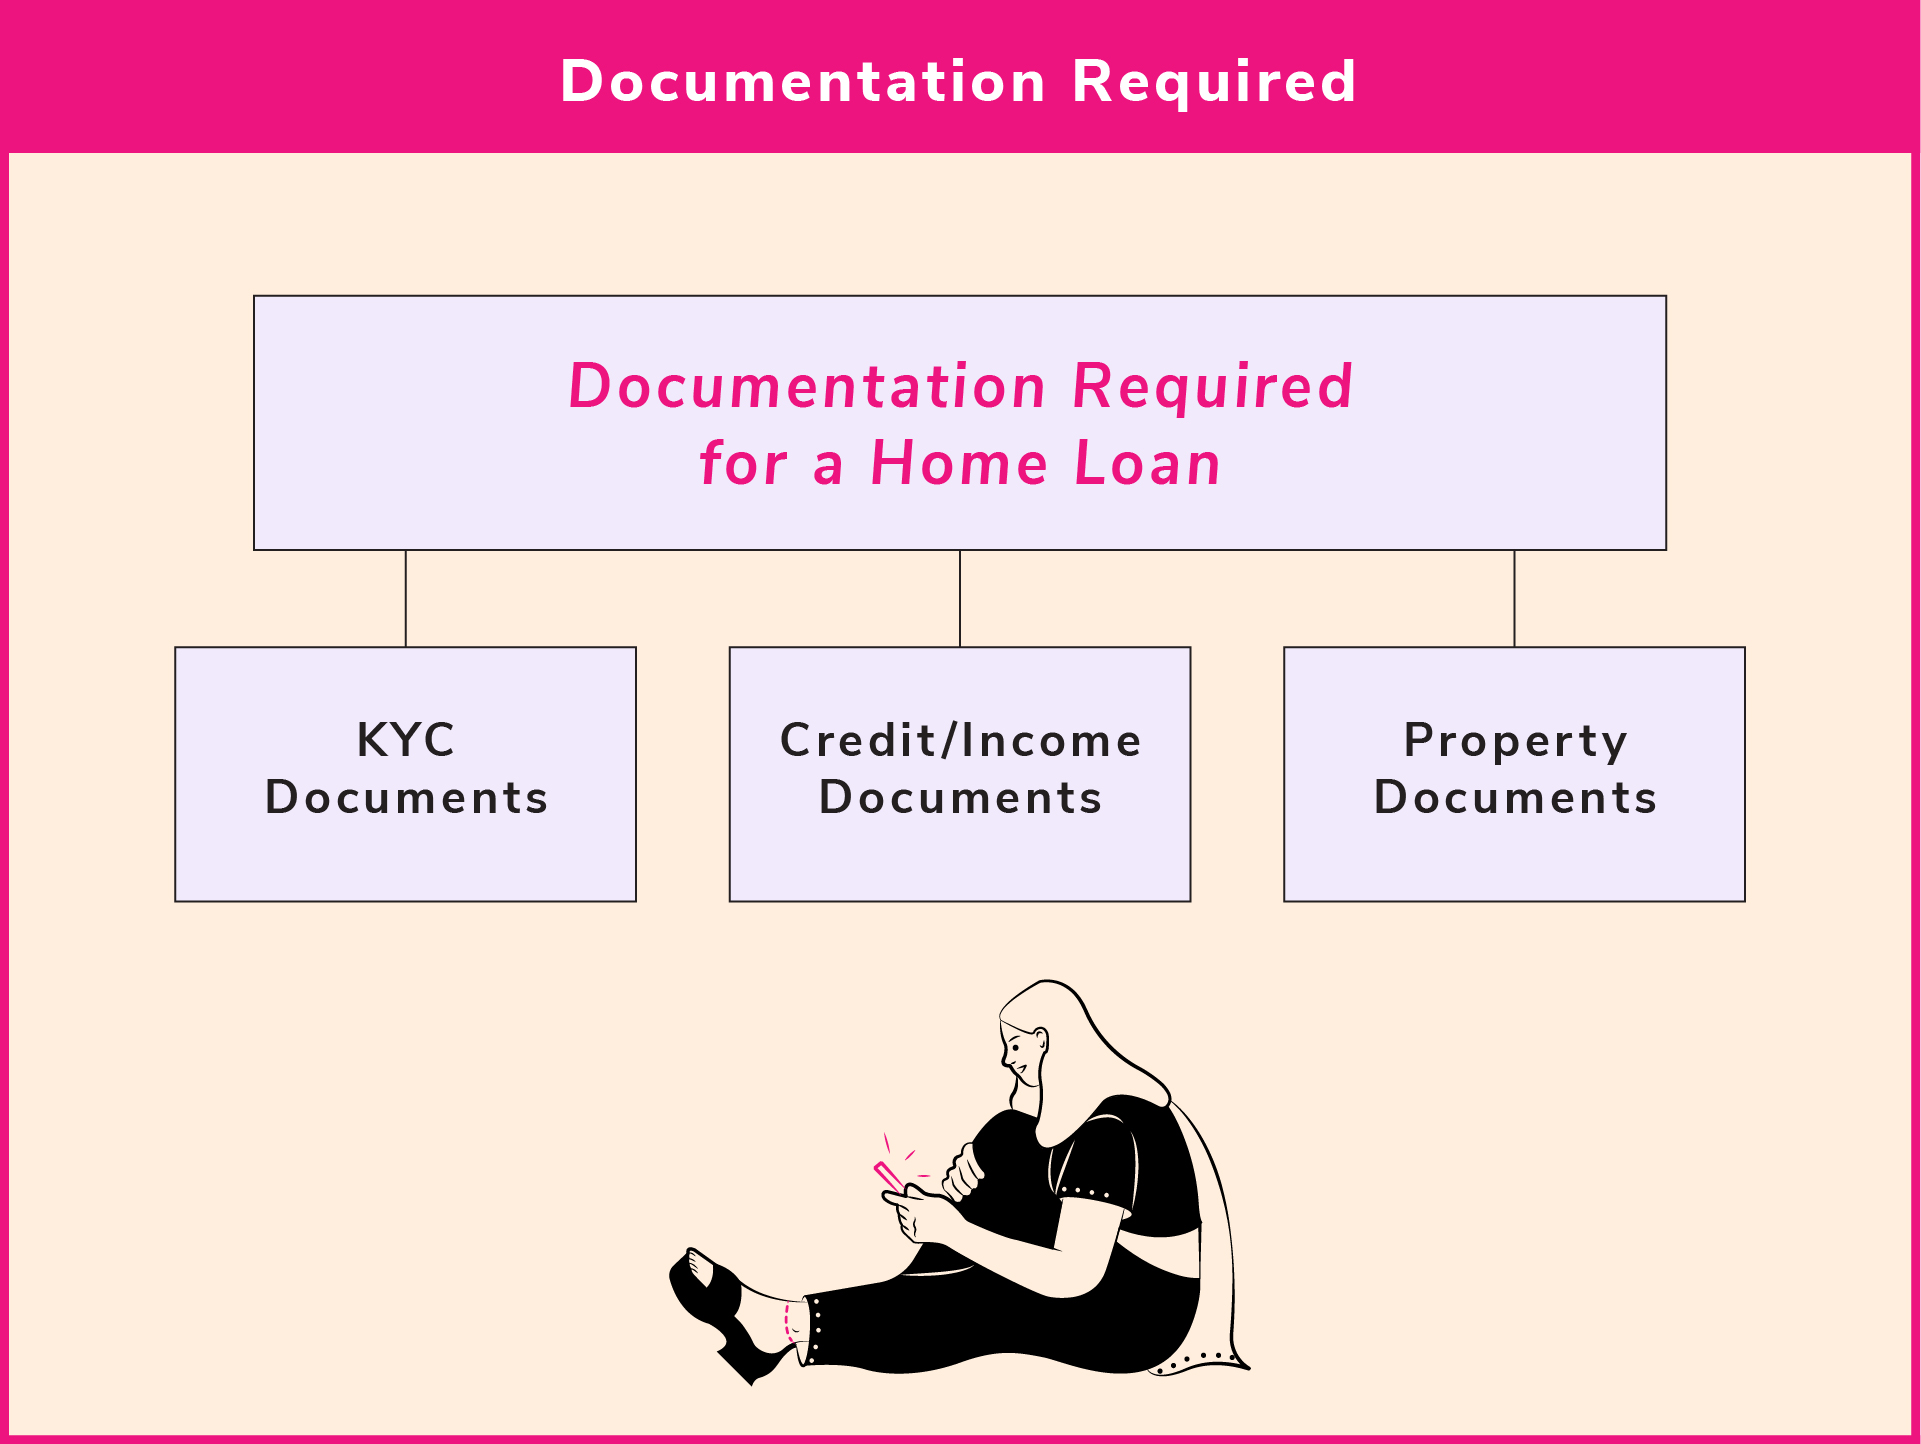 Documents required for home loan